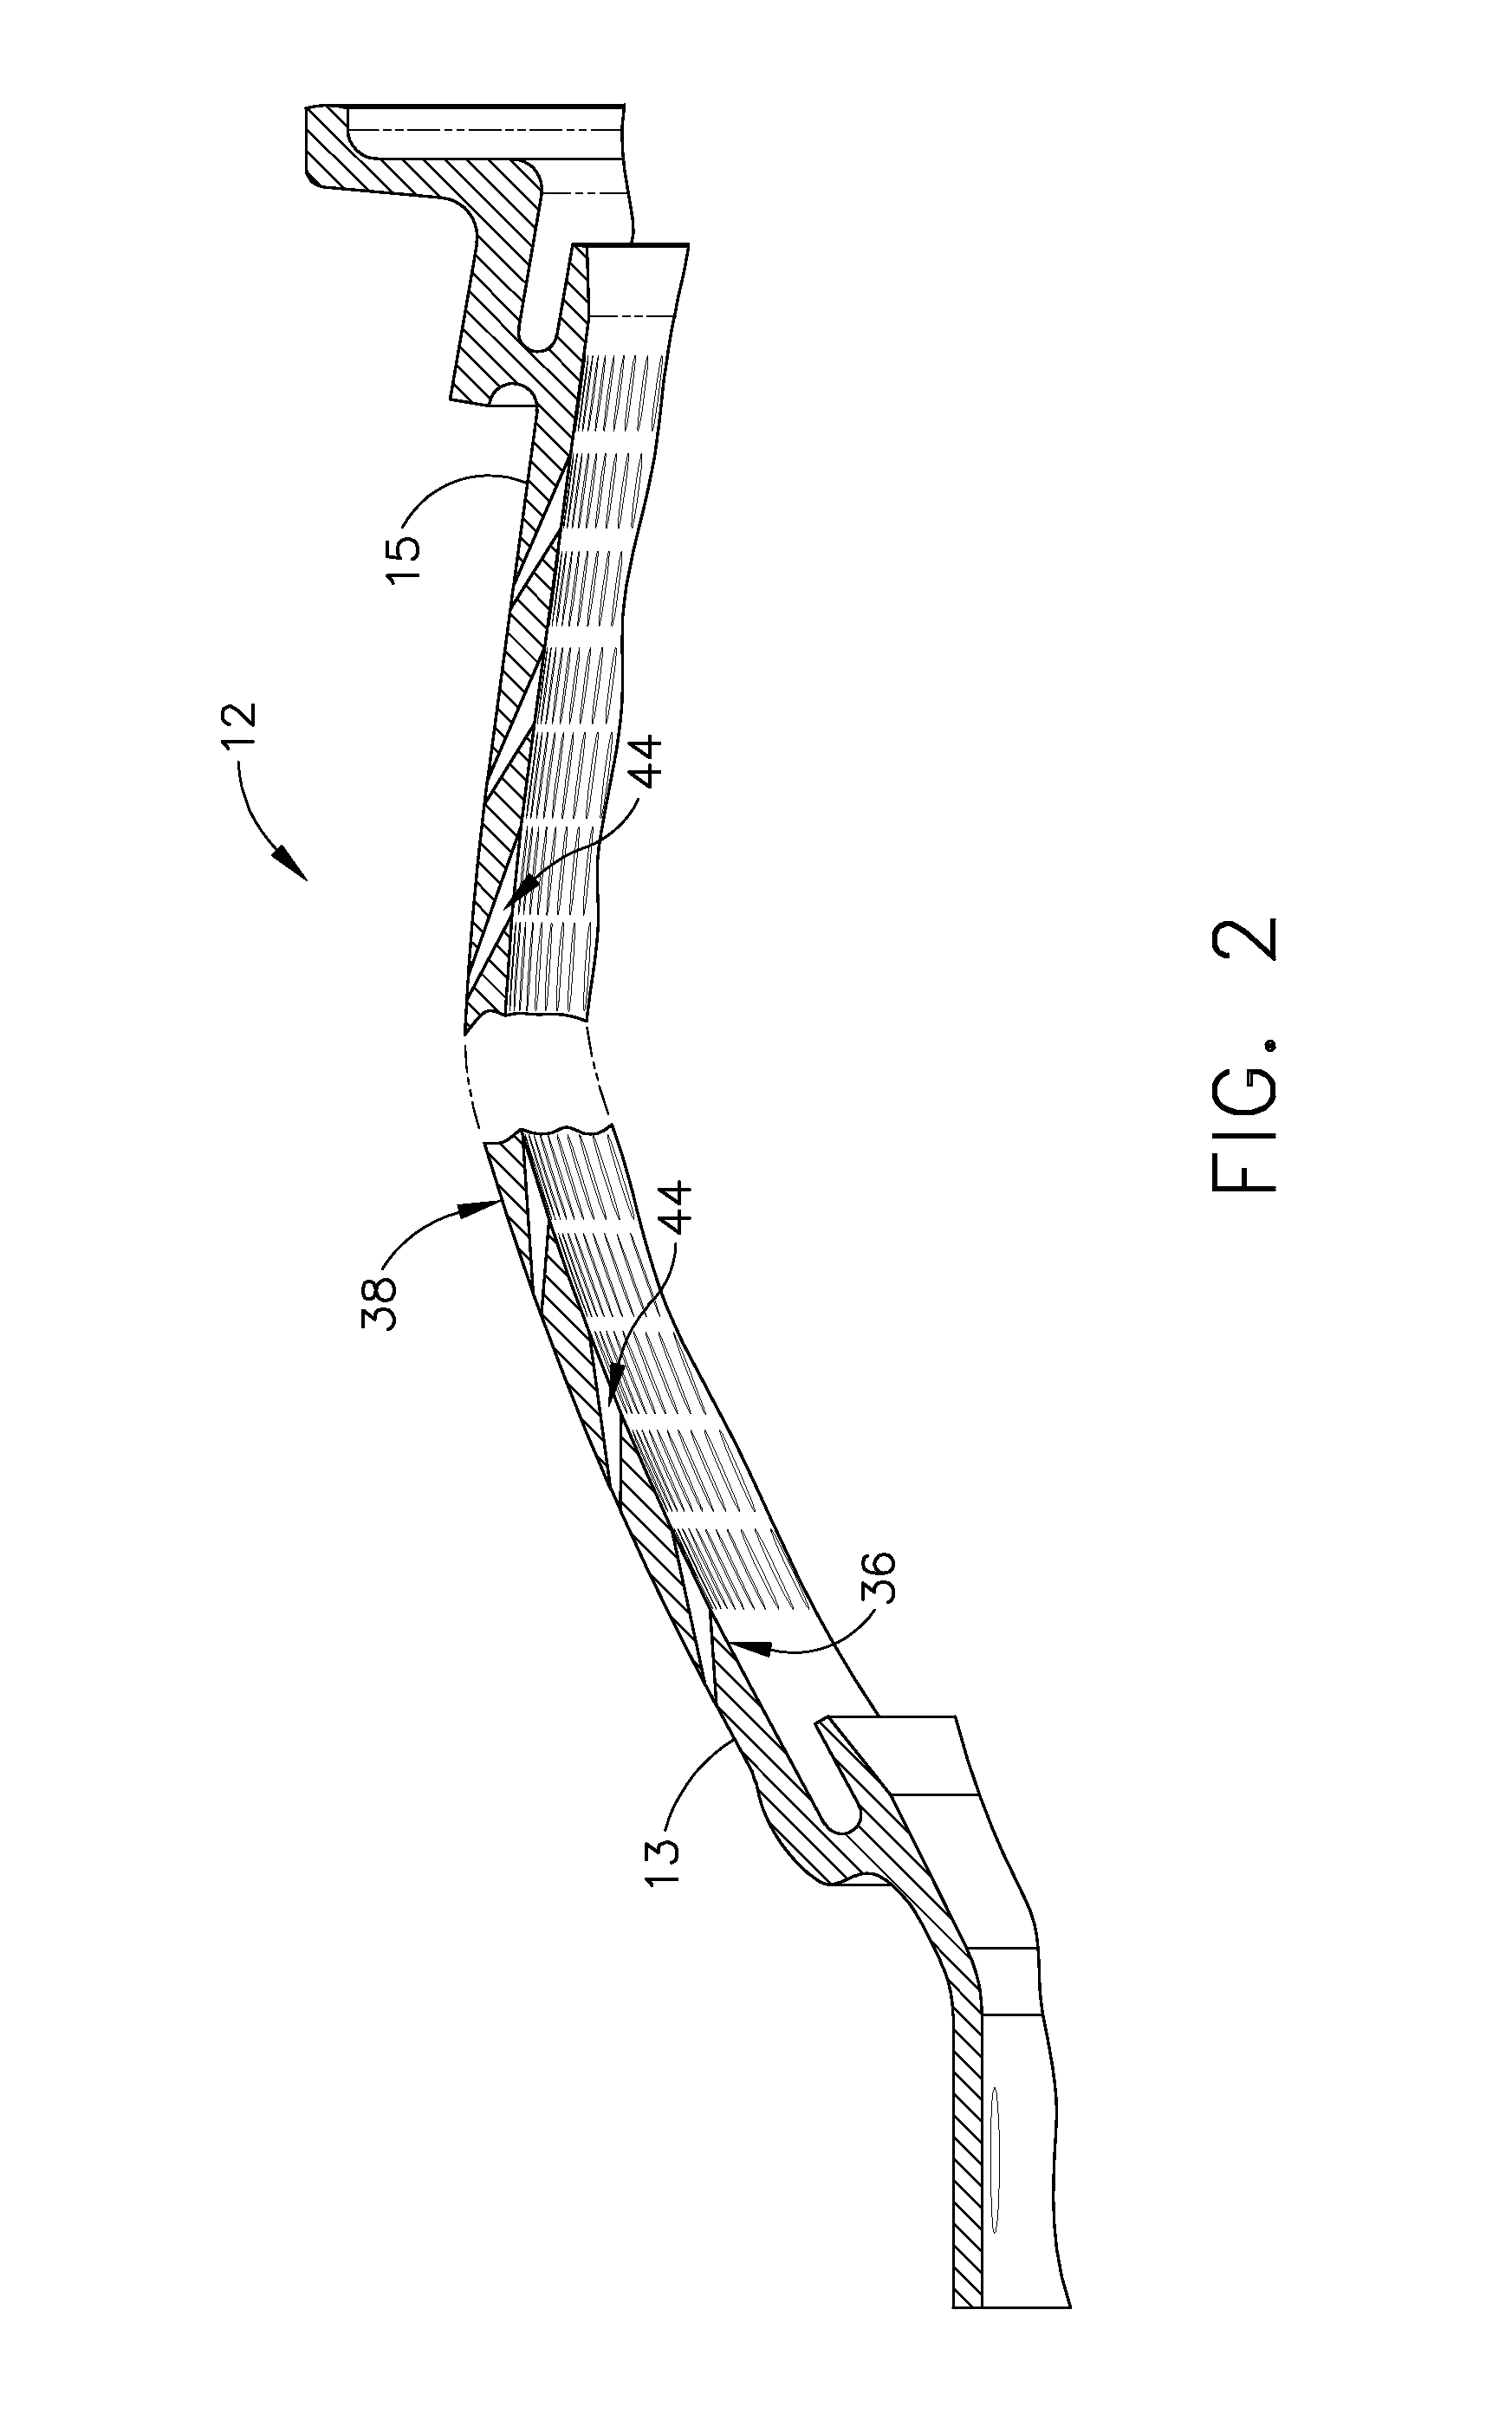 Cooling Holes For Gas Turbine Combustor Having A Non-Uniform Diameter Therethrough